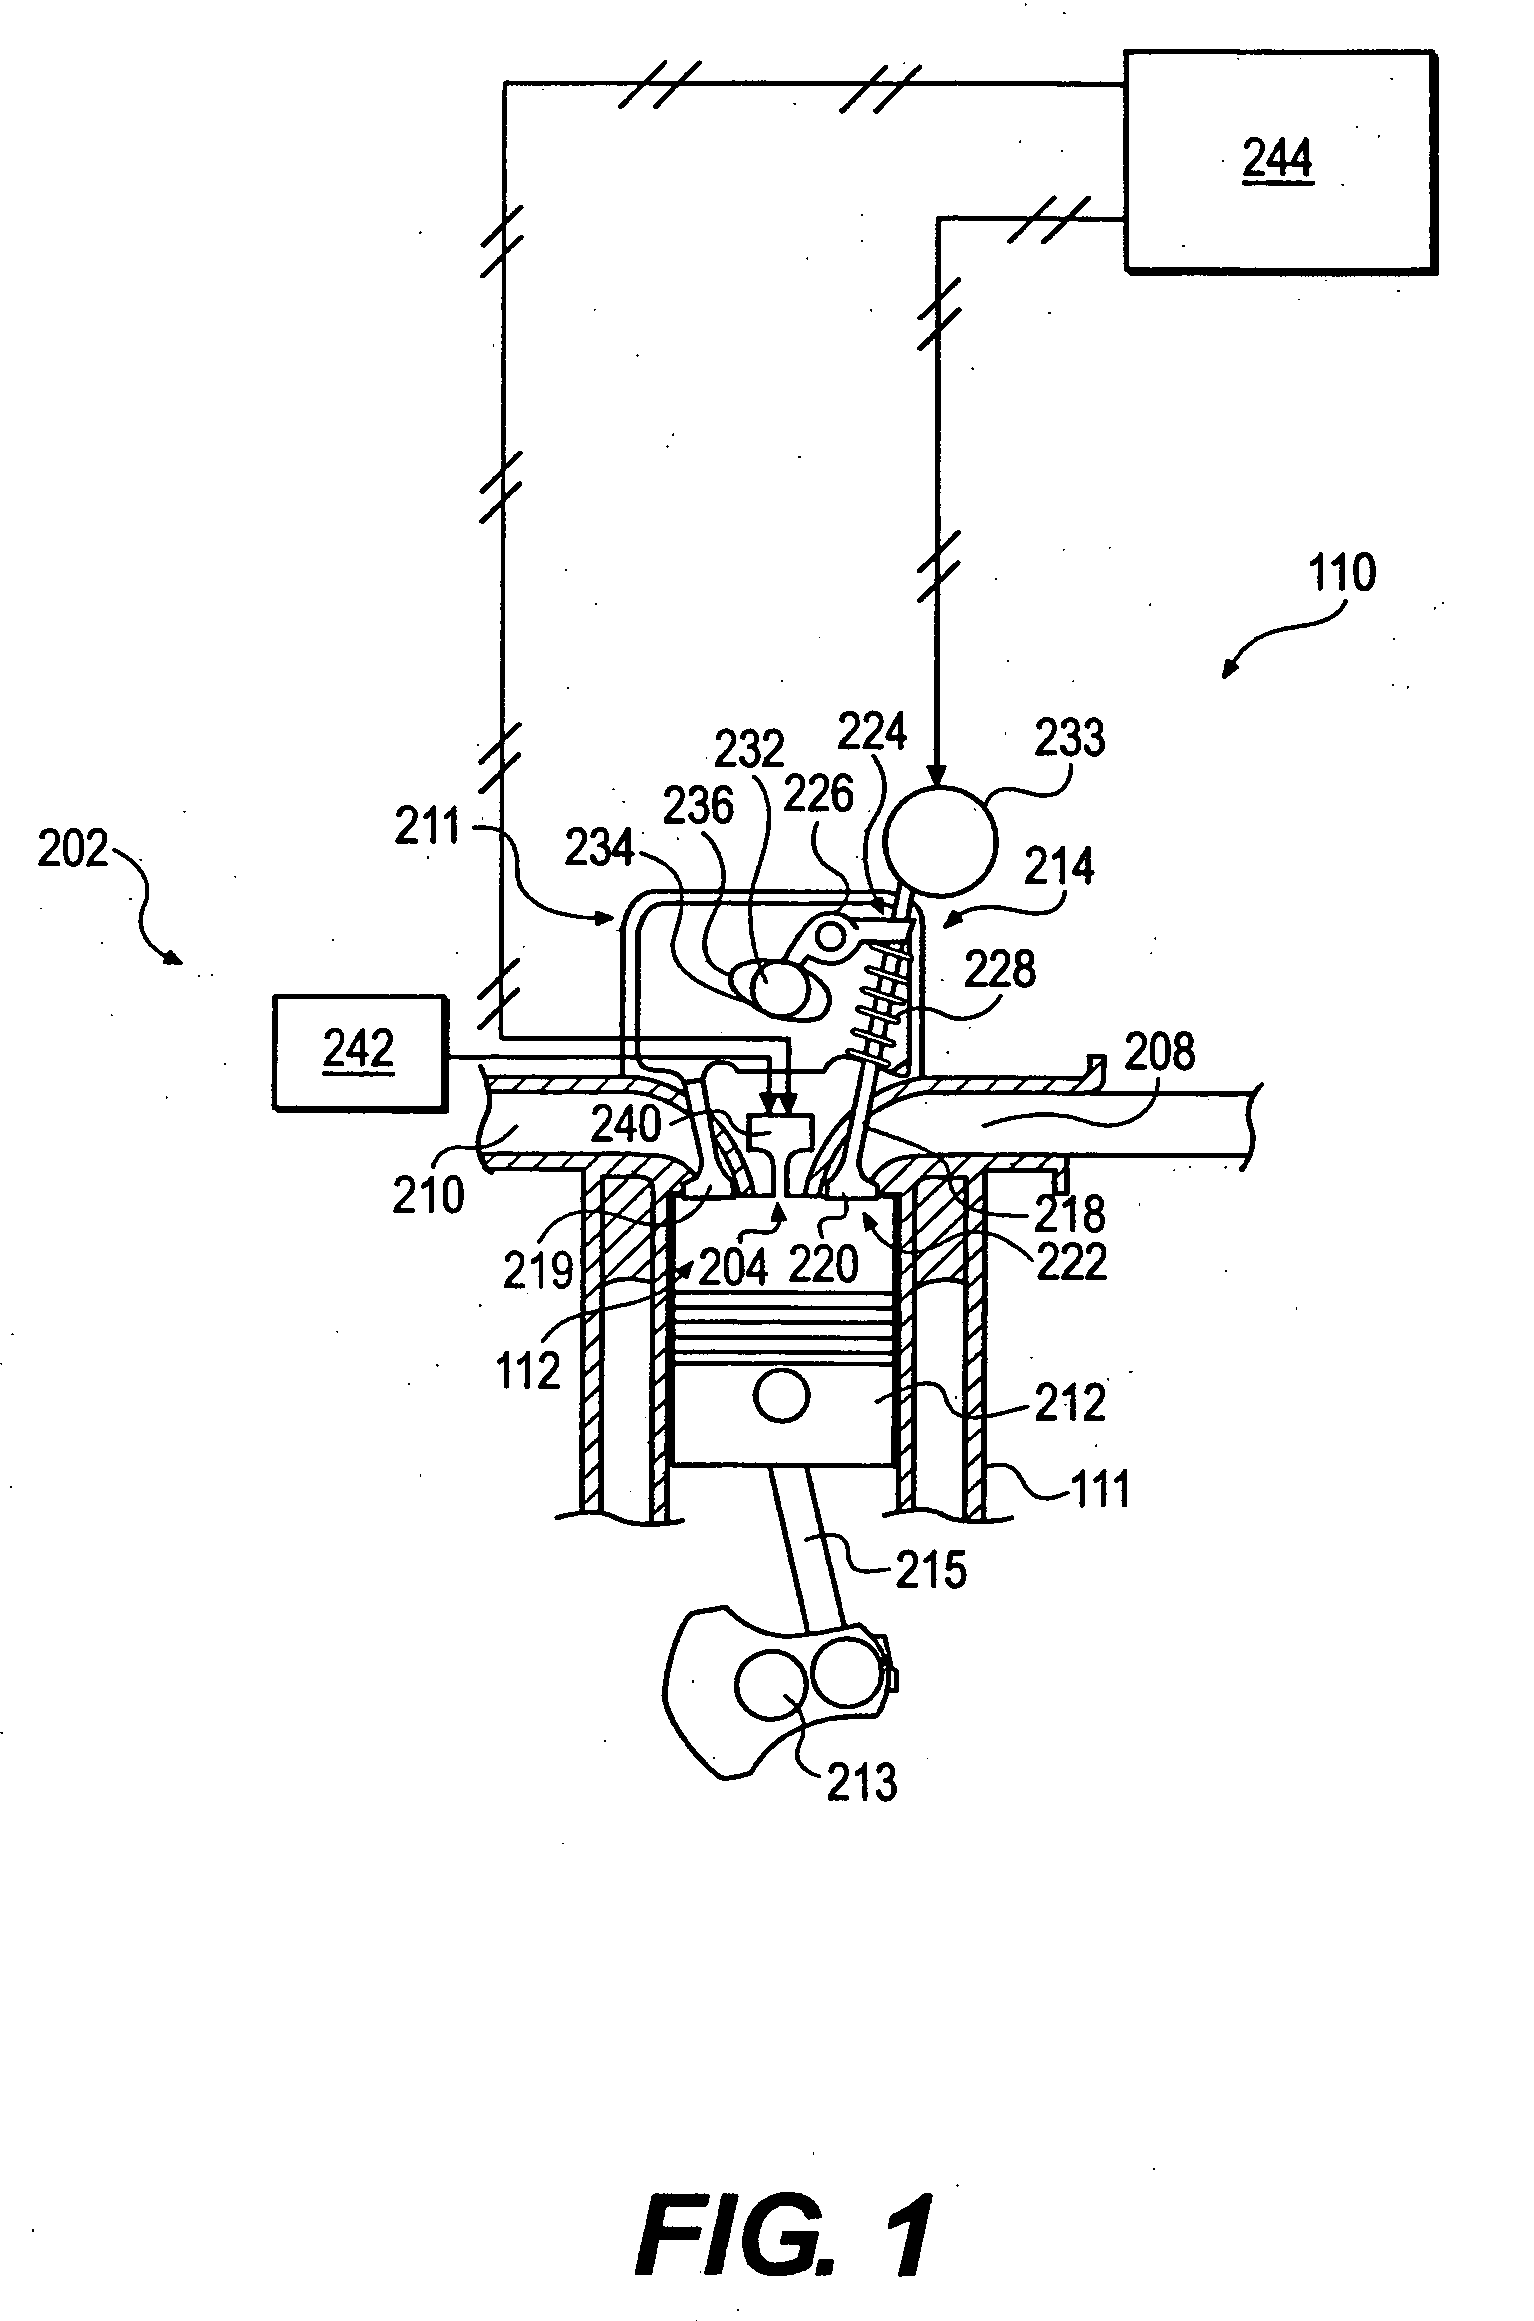 Exhaust gas recirculation system with in-cylinder valve actuation